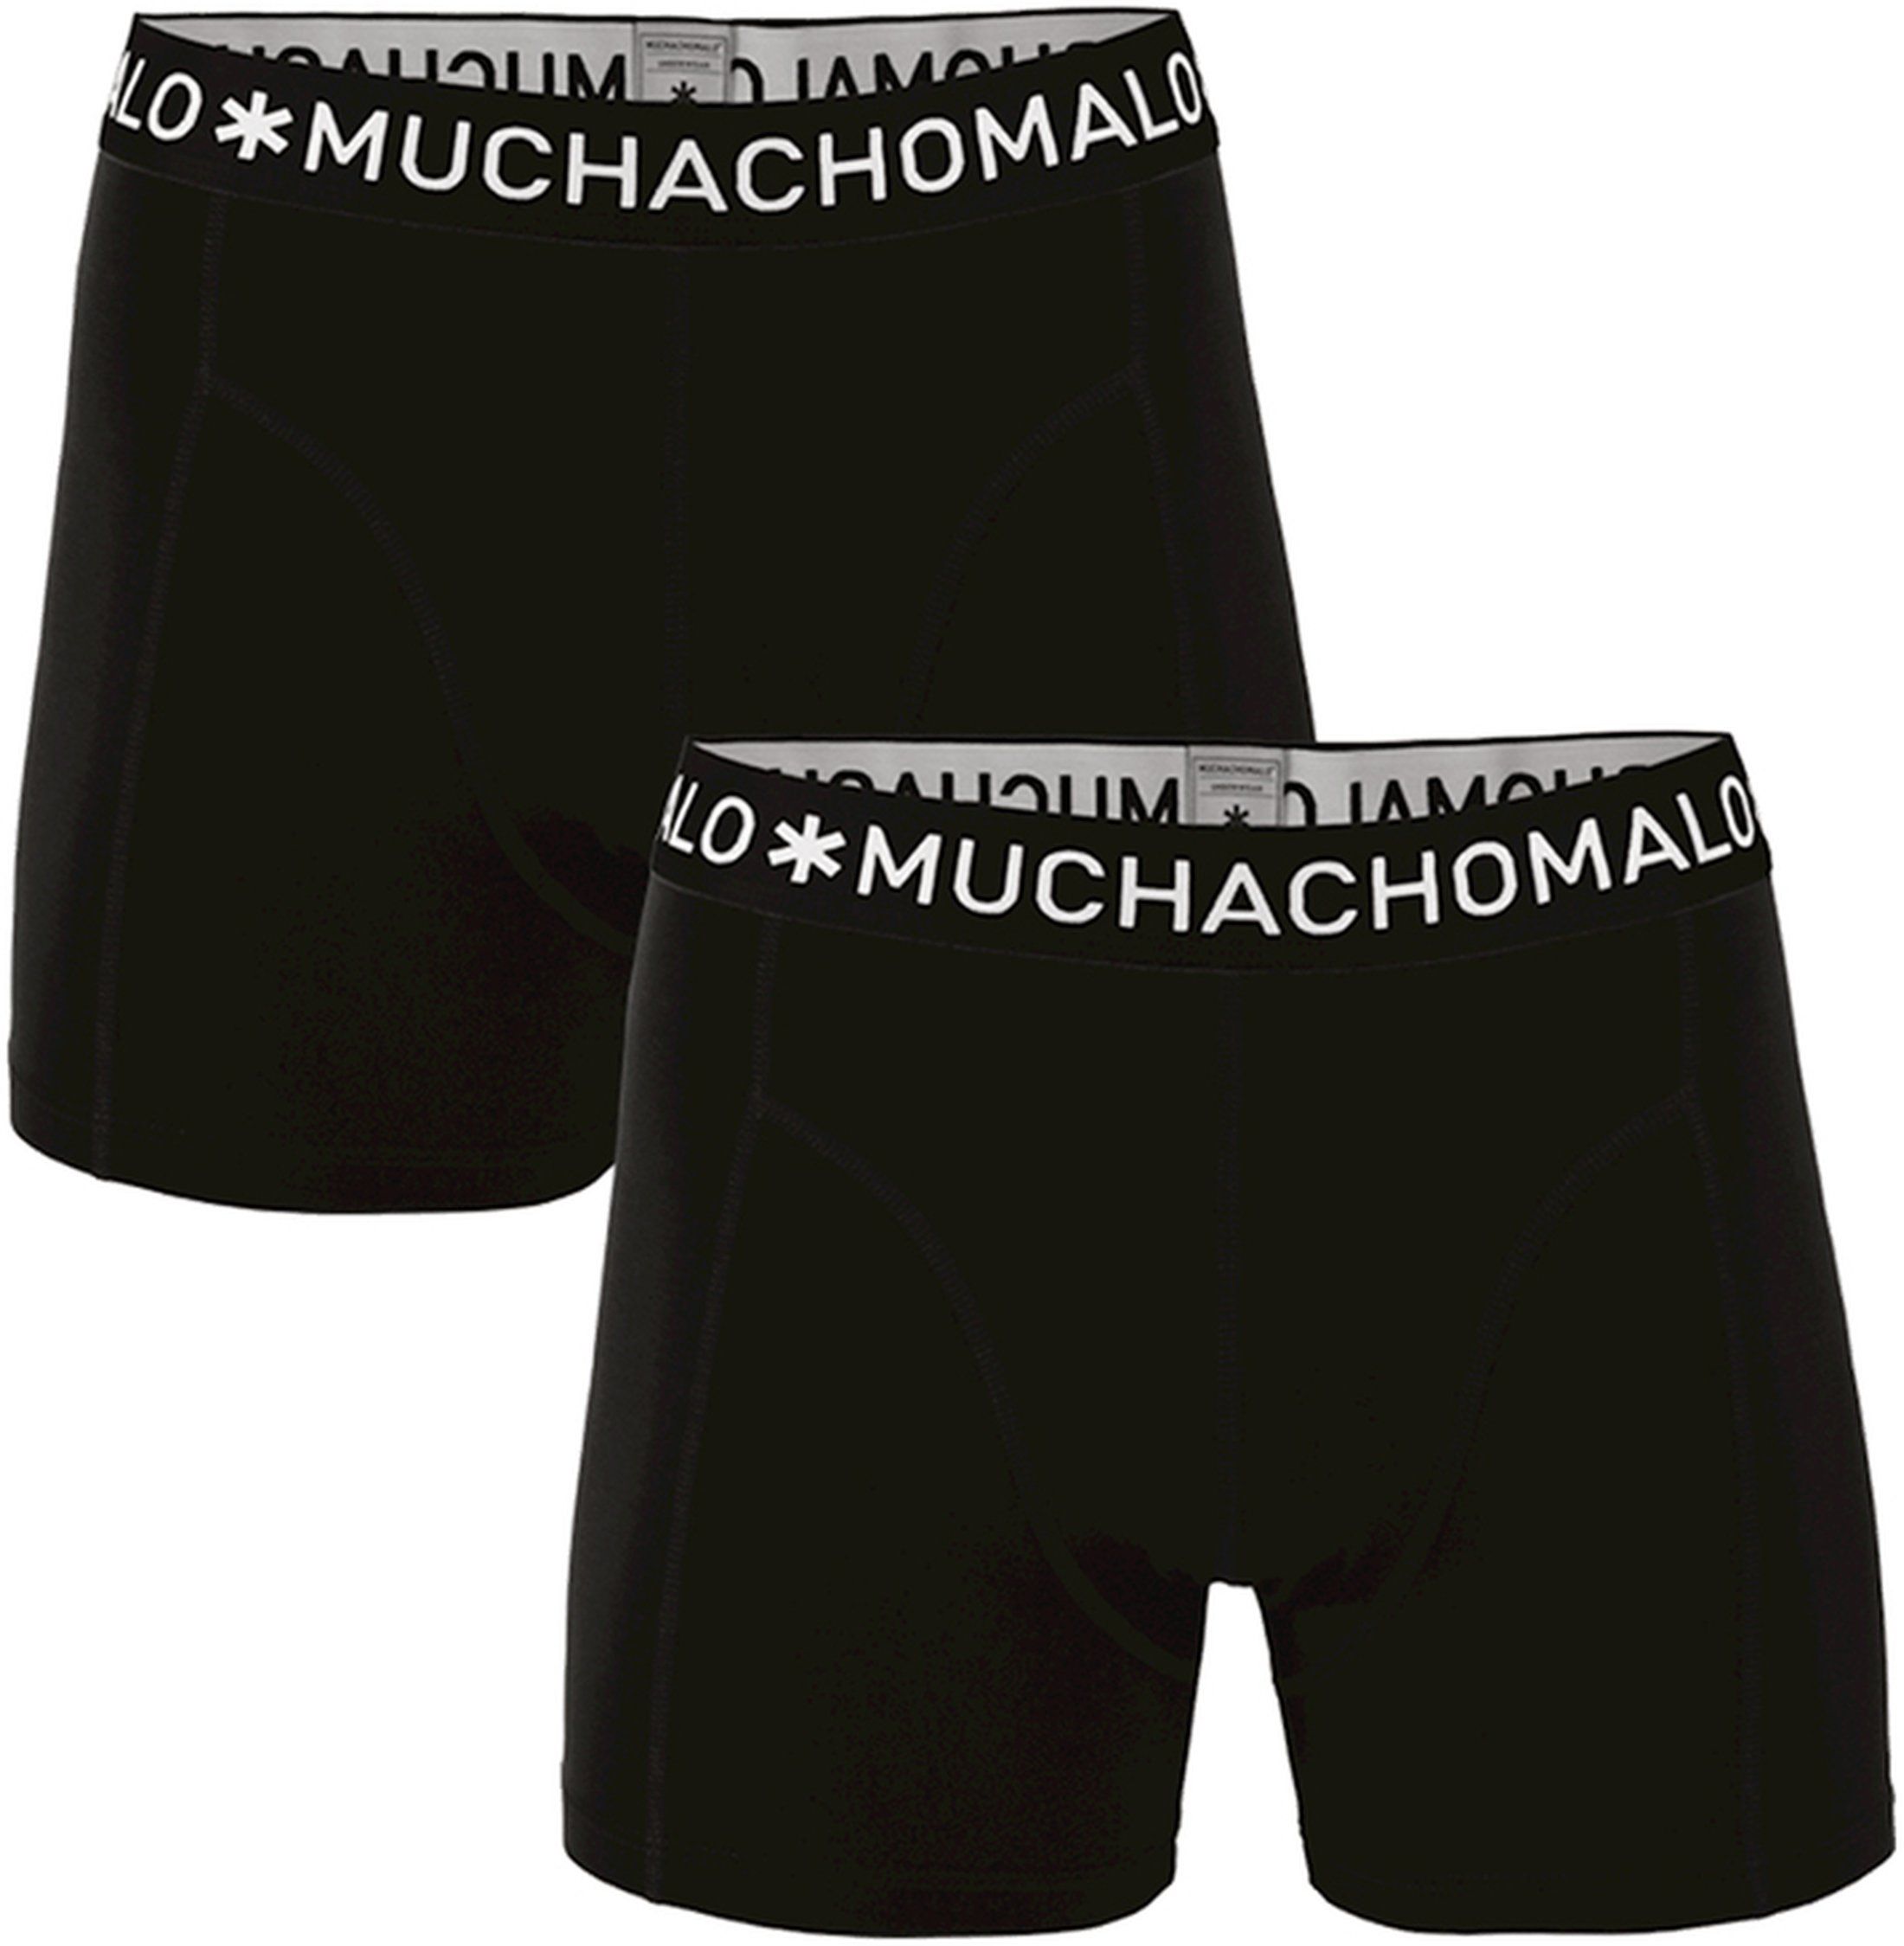 Muchachomalo Boxer Shorts 2-Pack Solid Black size L